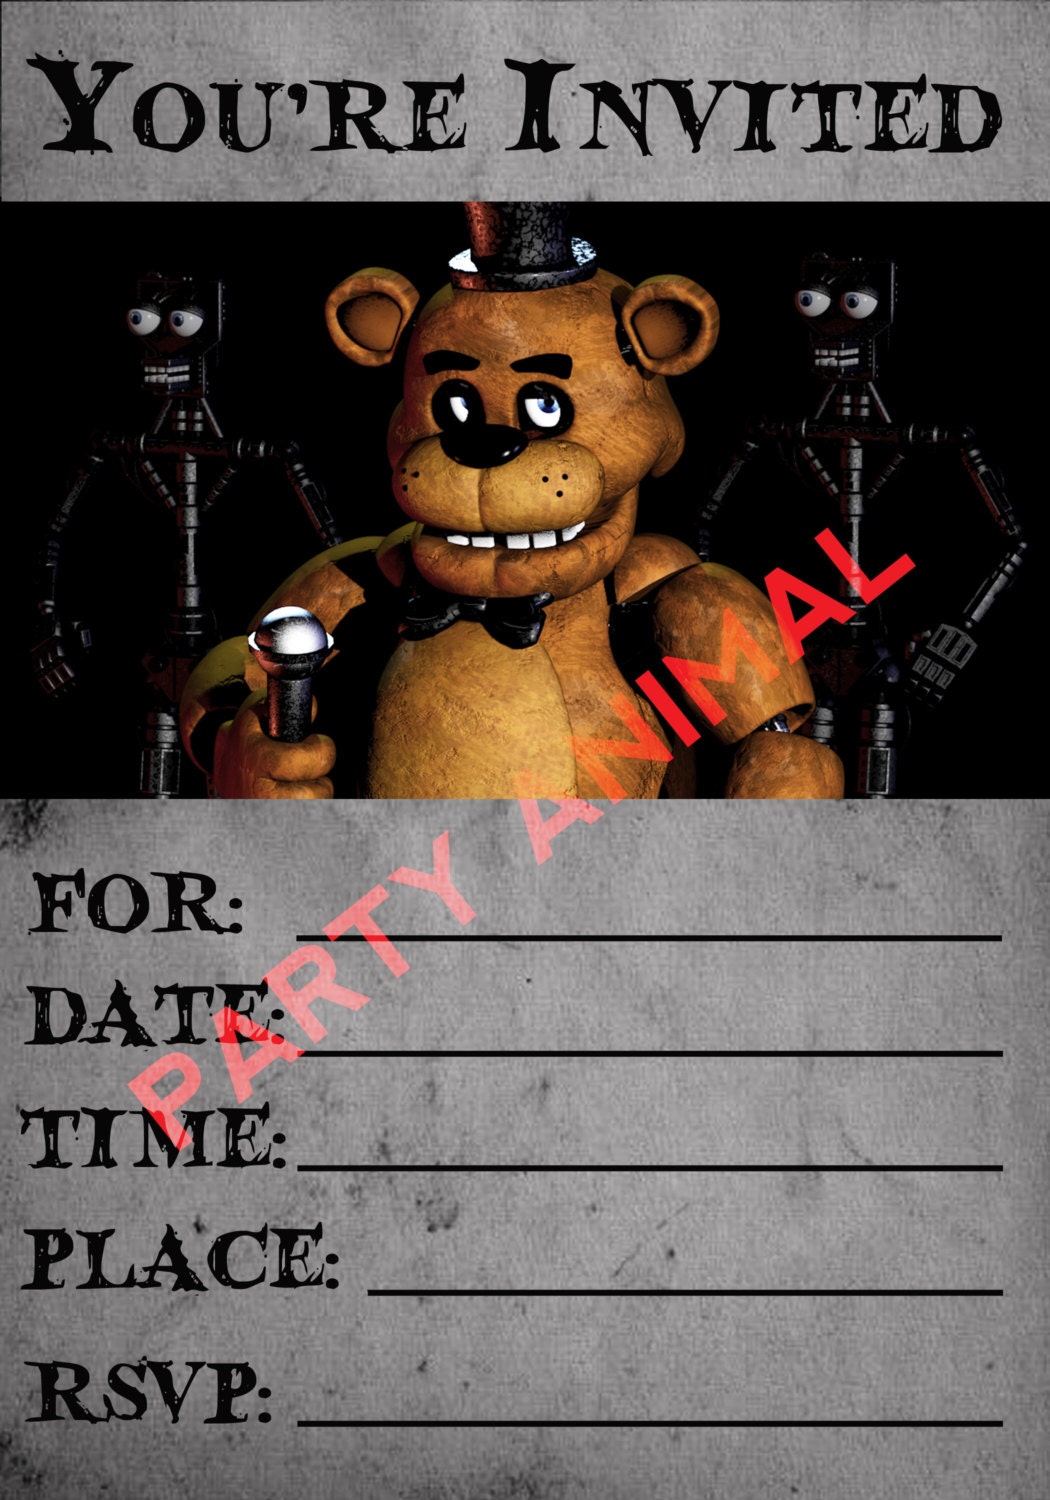 five-nights-at-freddy-s-party-invitation-instant-download